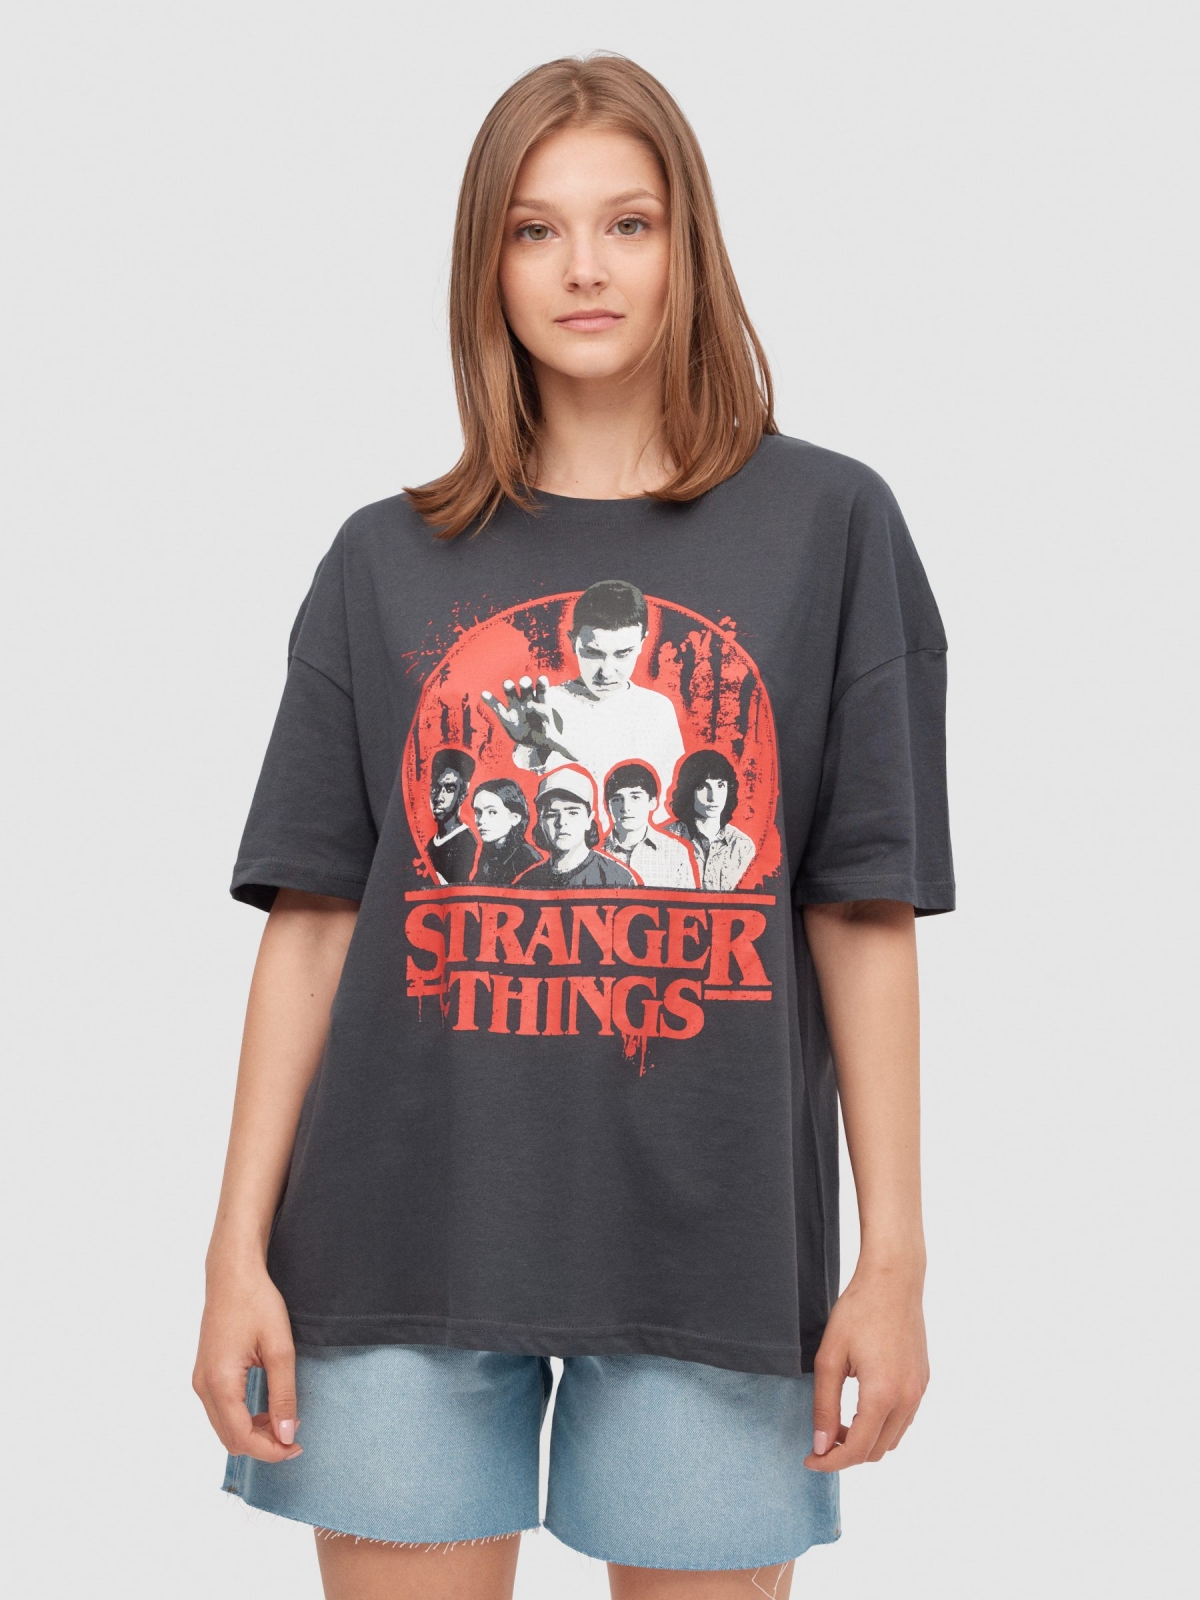 Stranger Things oversize t-shirt dark grey middle front view